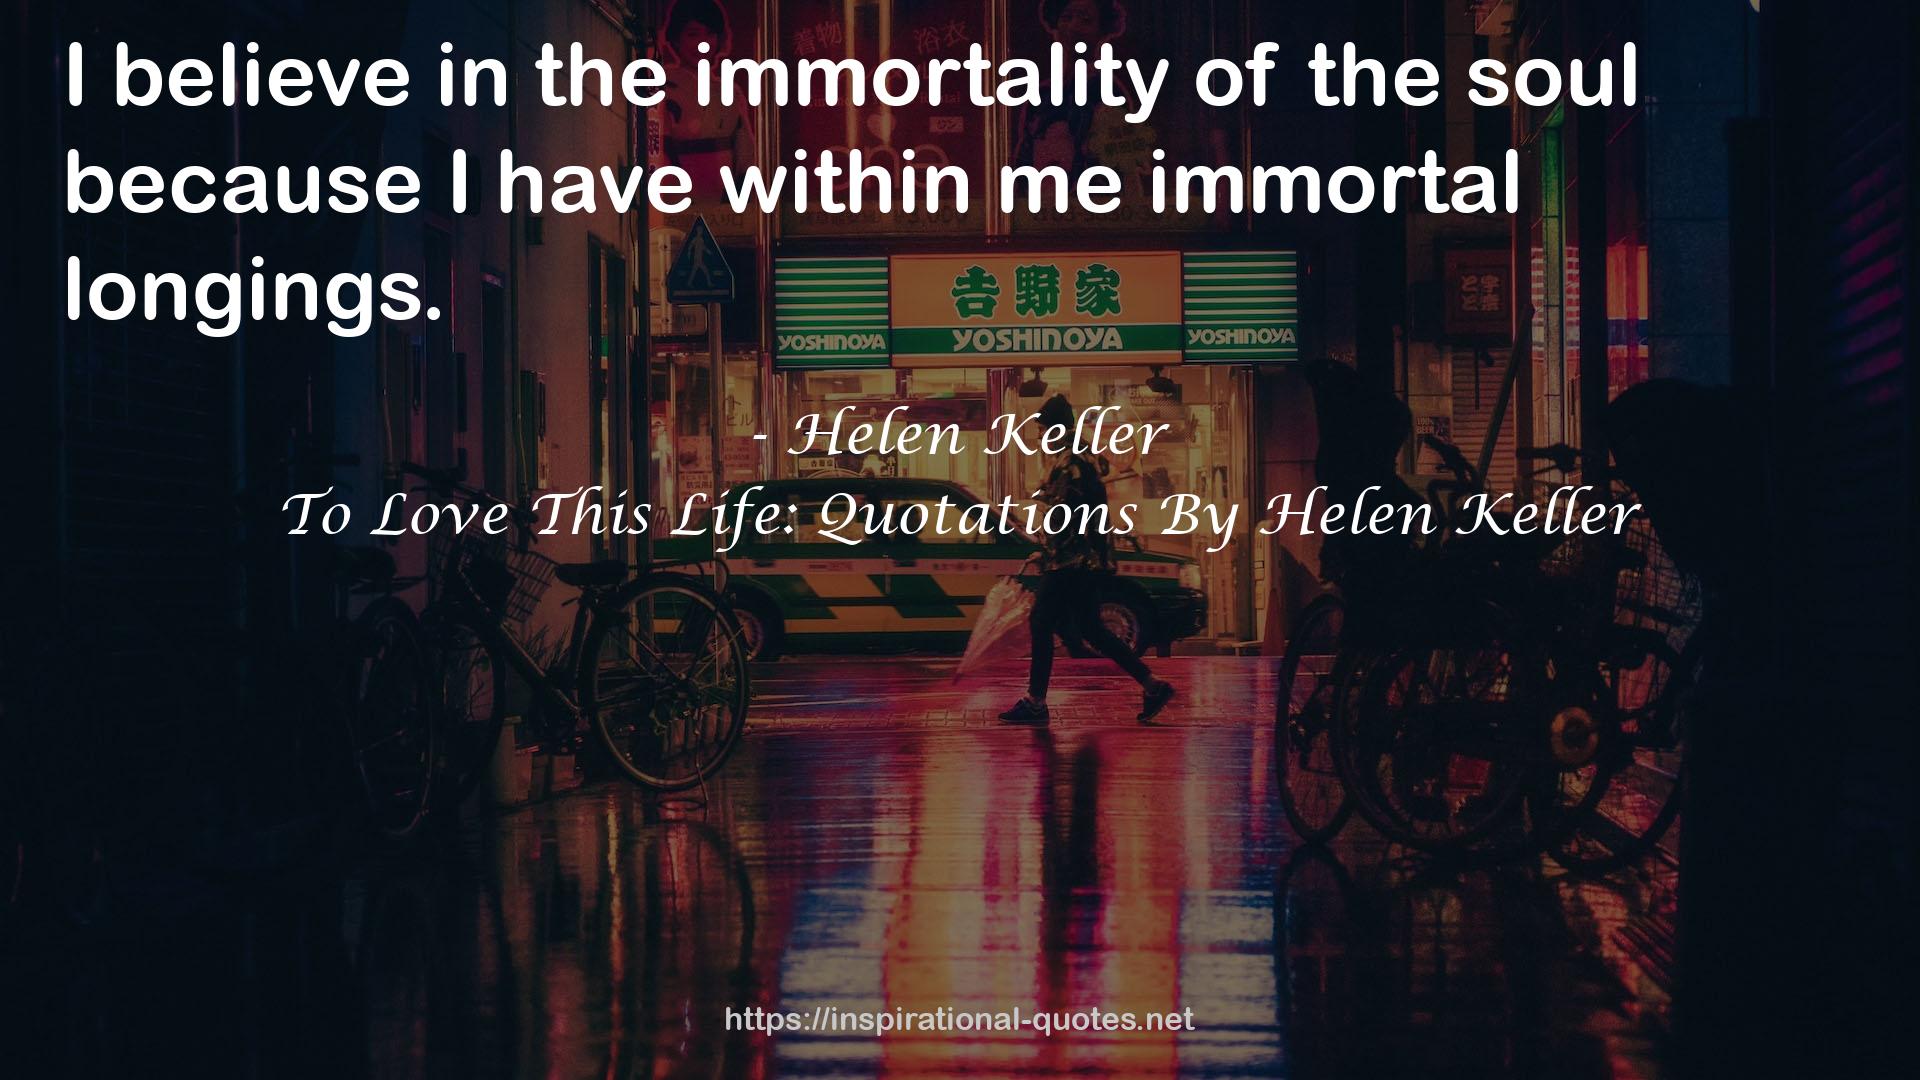 To Love This Life: Quotations By Helen Keller QUOTES